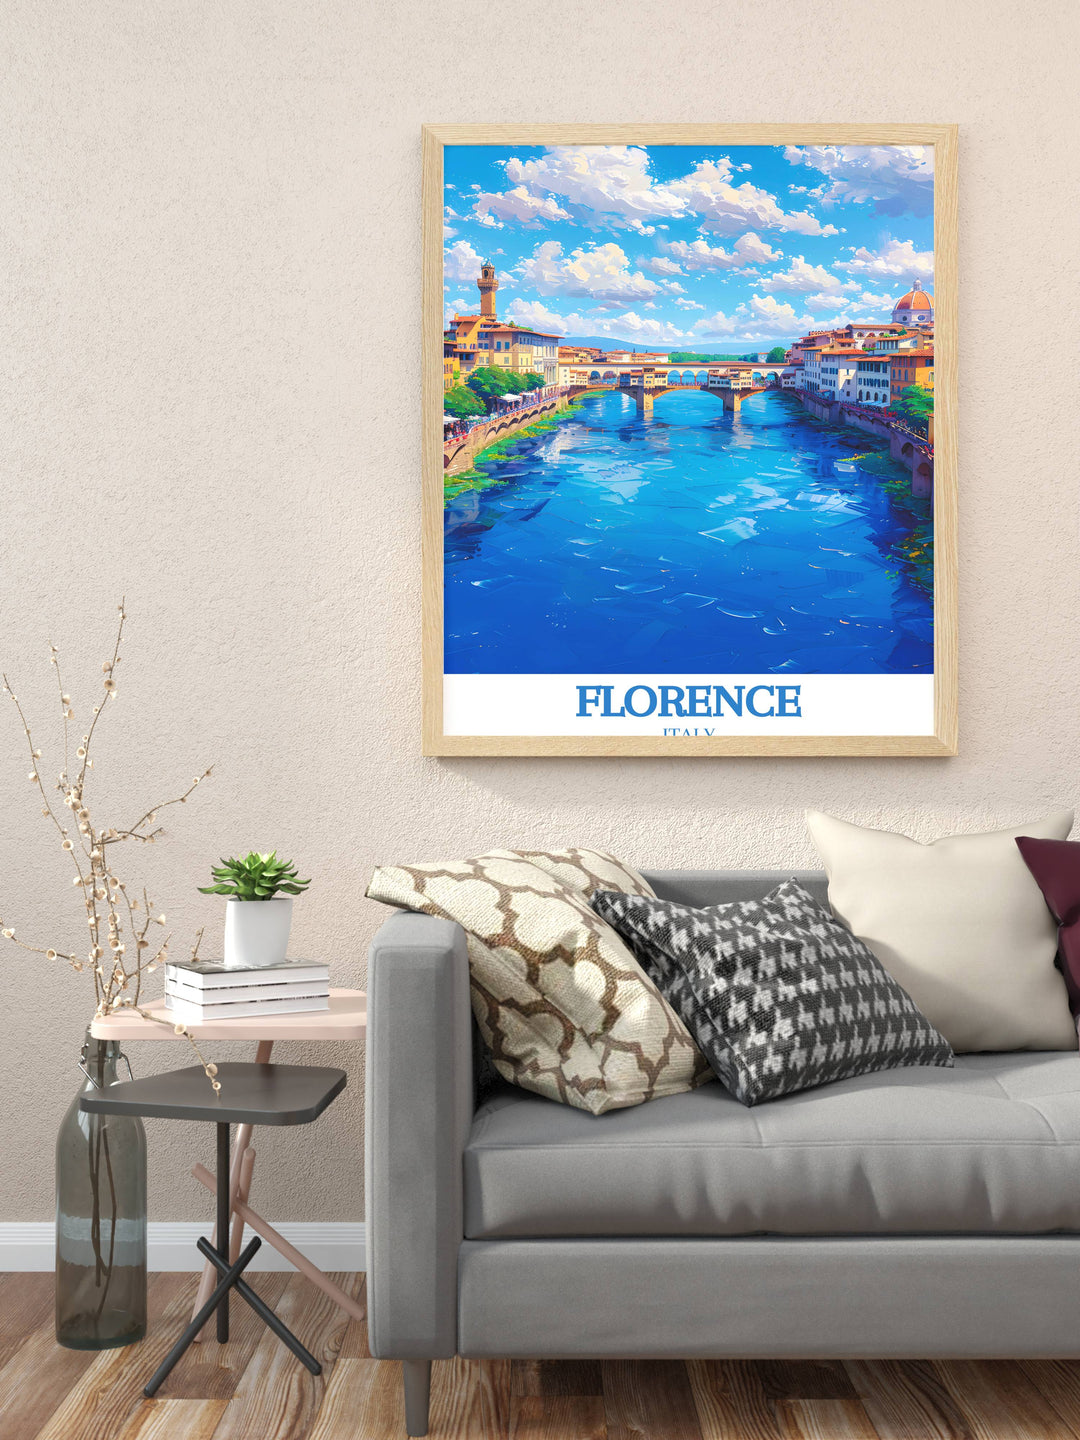 Captivating Florence Italy Wall Print that transports viewers to the cobblestone streets and majestic palaces of Florence enriching any space with its beauty